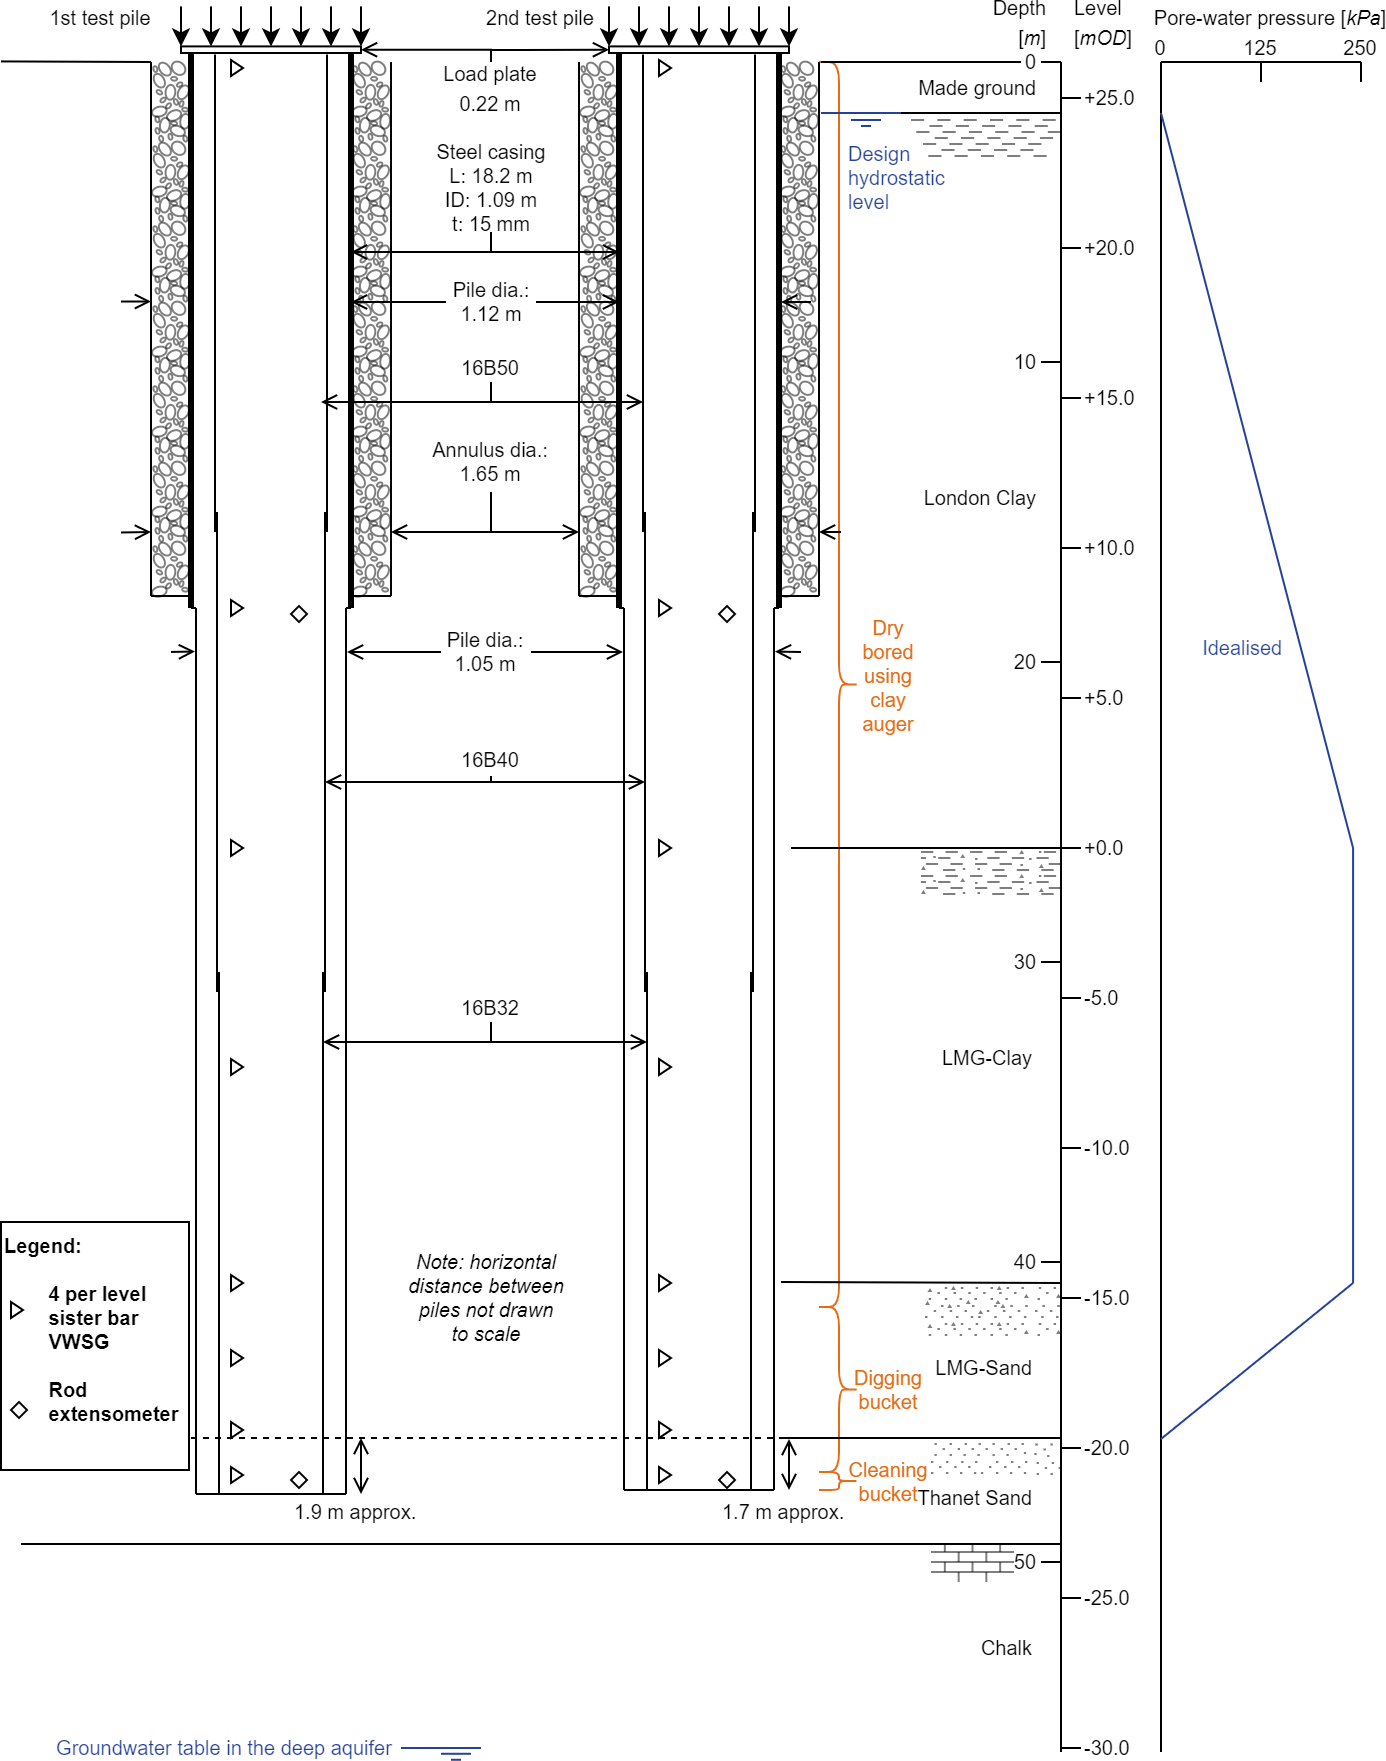 Diagram of a  schematic of test pile details and ground water (distributed fibre optic sensing cables not shown for clarity)